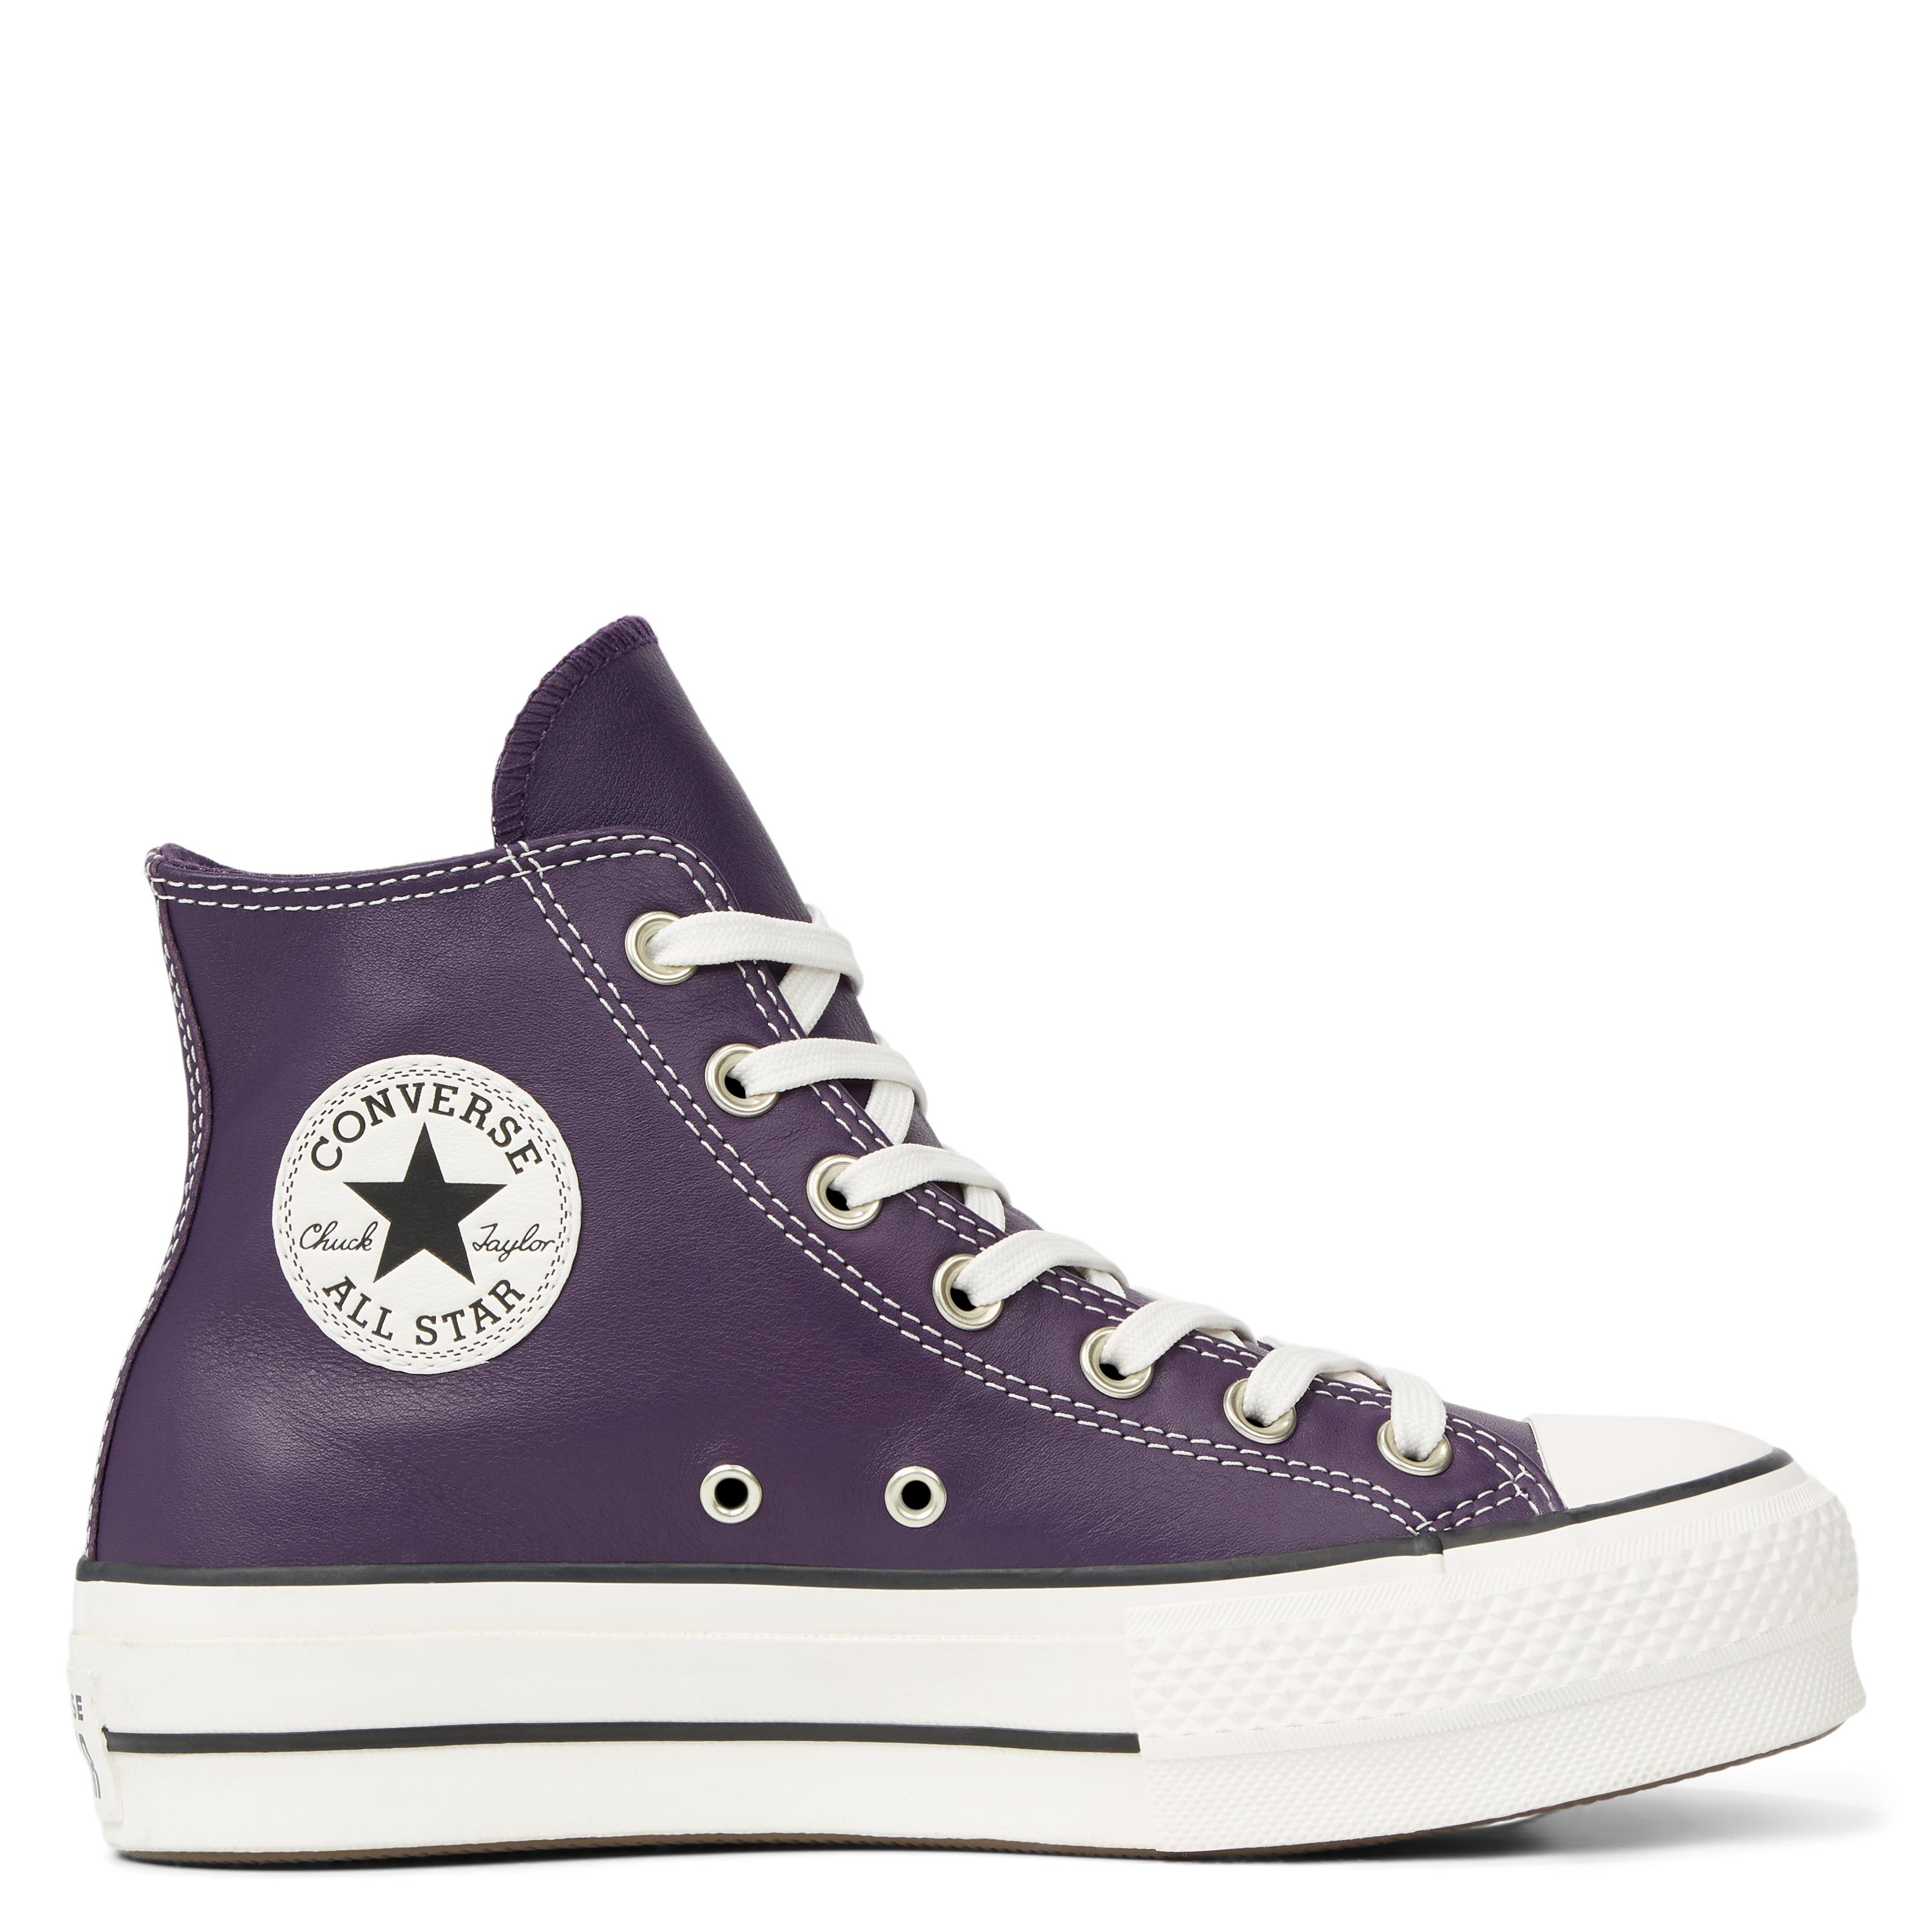 converse all star leather purple, OFF 